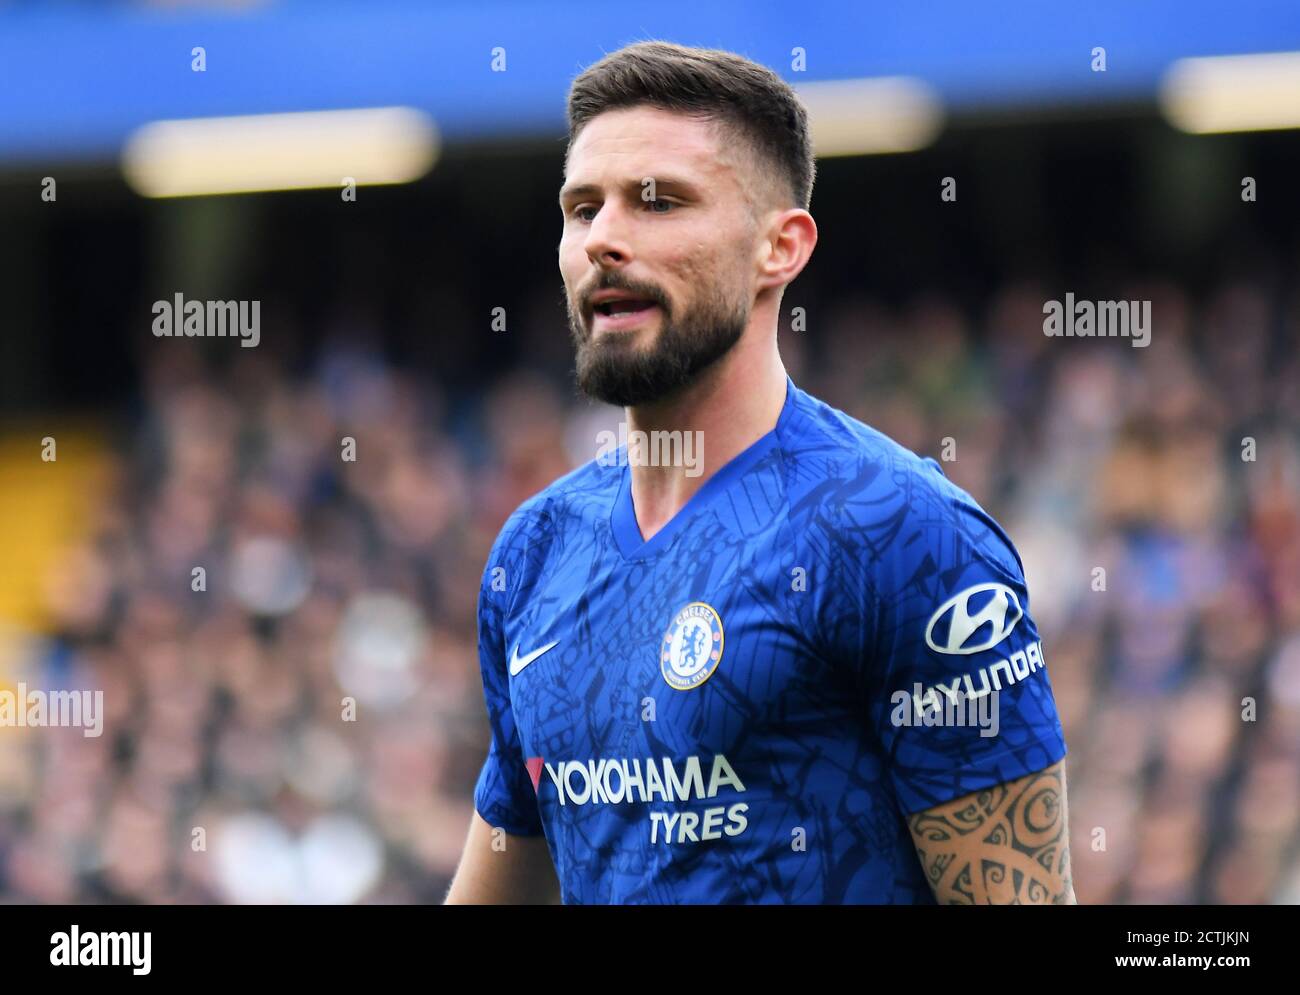 LONDON, ENGLAND - FEBRUARY 22, 2020: Olivier Giroud of Chelsea pictured during the 2019/20 Premier League game between Chelsea FC and Tottenham Hotspur FC at Stamford Bridge. Stock Photo